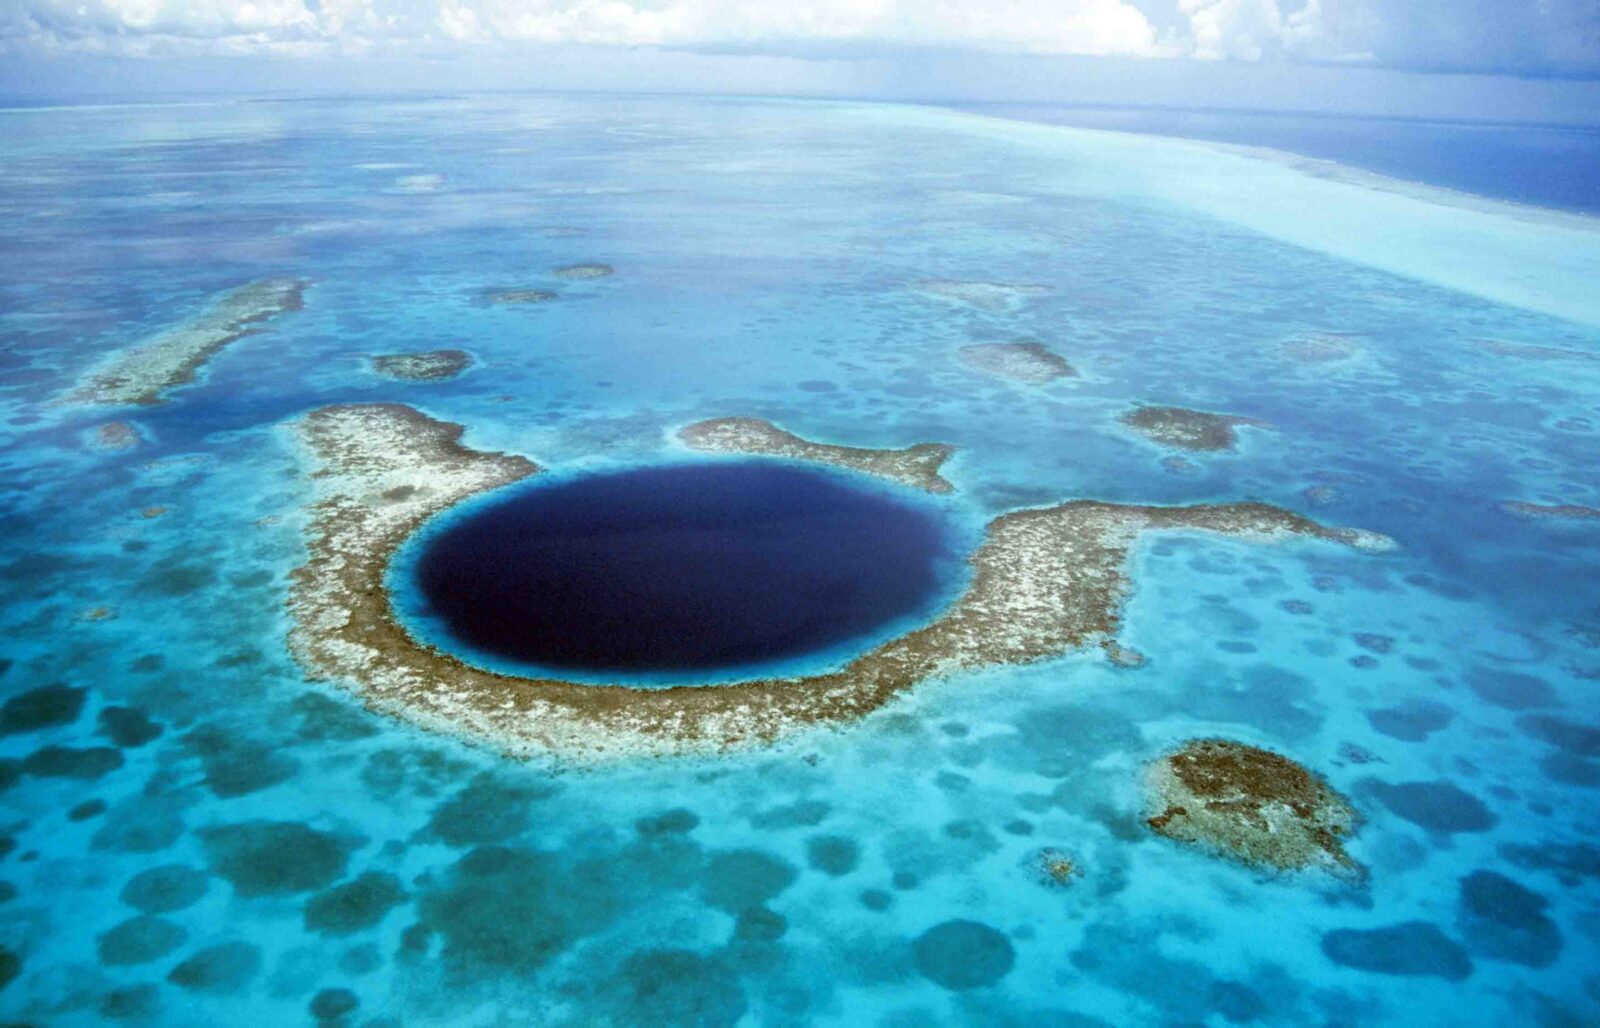 Where on Earth Are You? 🌍 Only a Geography Specialist Can Get a Perfect Score on This Quiz Great Blue Hole, Belize Barrier Reef